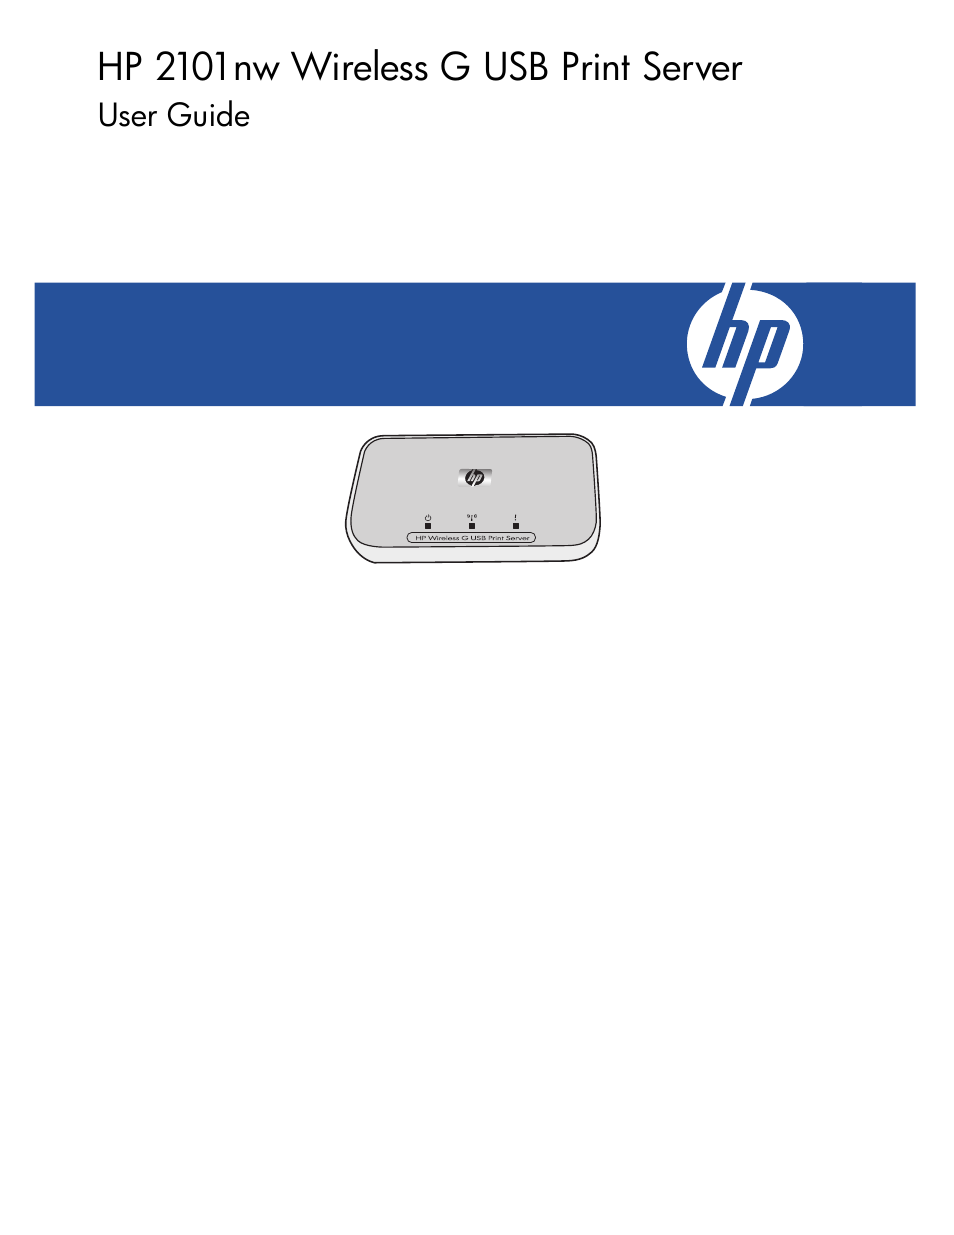 HP 2101nw Wireless G Print Server User Manual | 26 pages